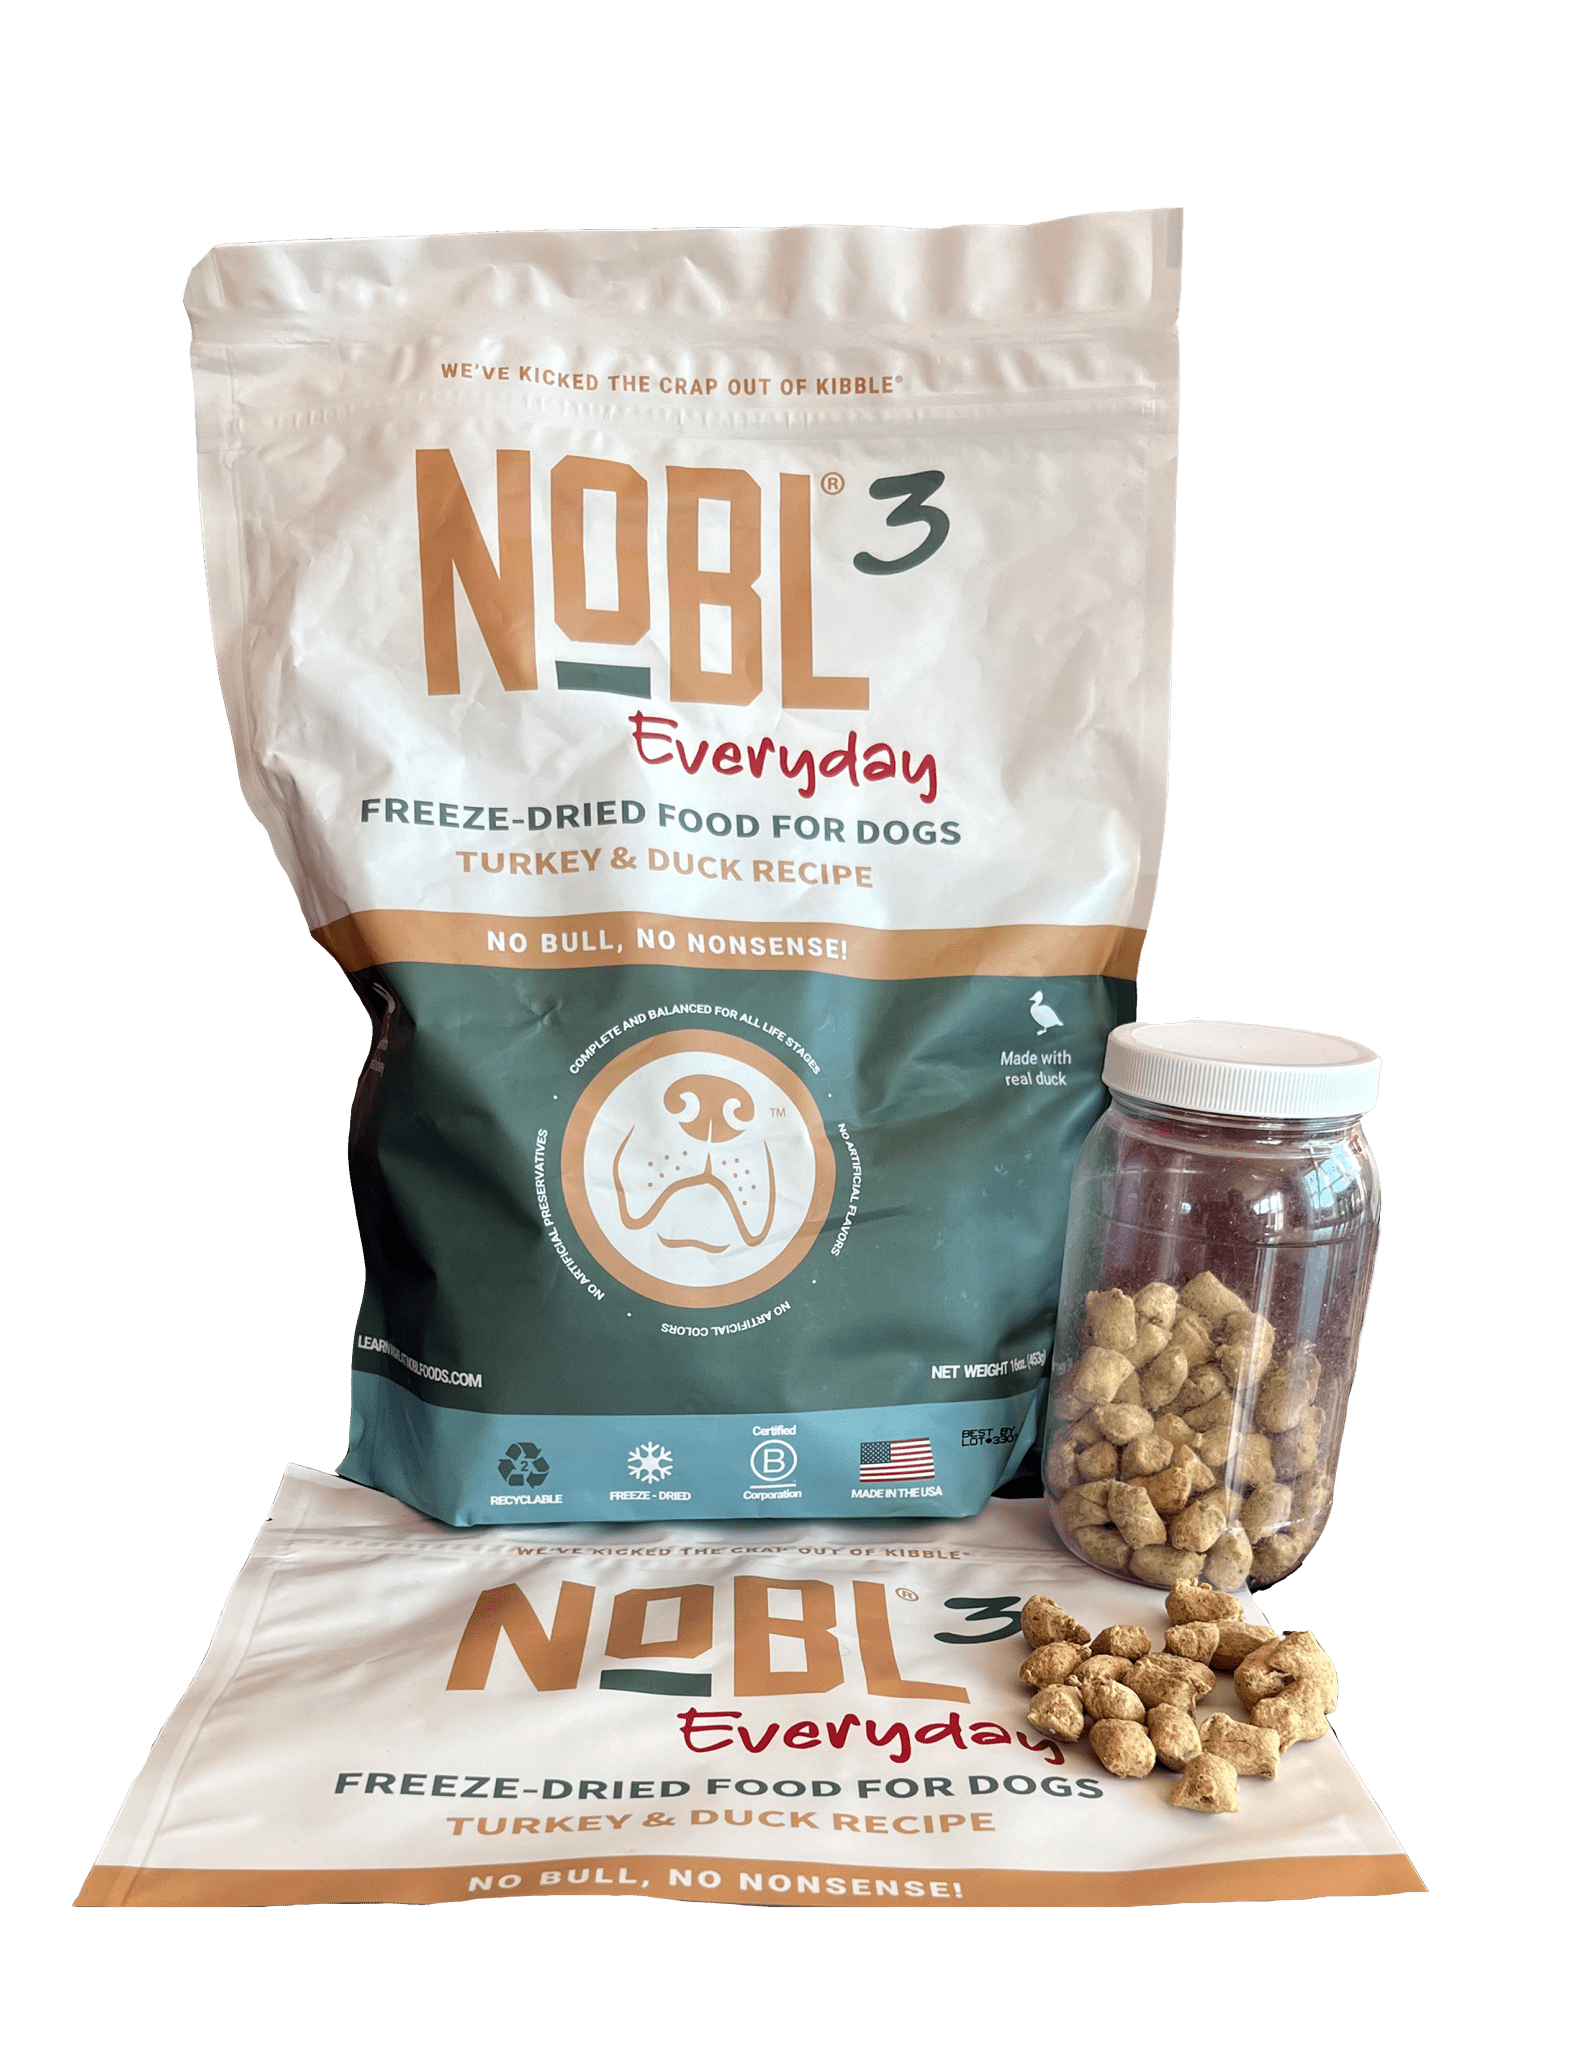 NOBL3 Everyday Turkey & Duck Recipe - All Life Stages - 35oz - NOBL Foods